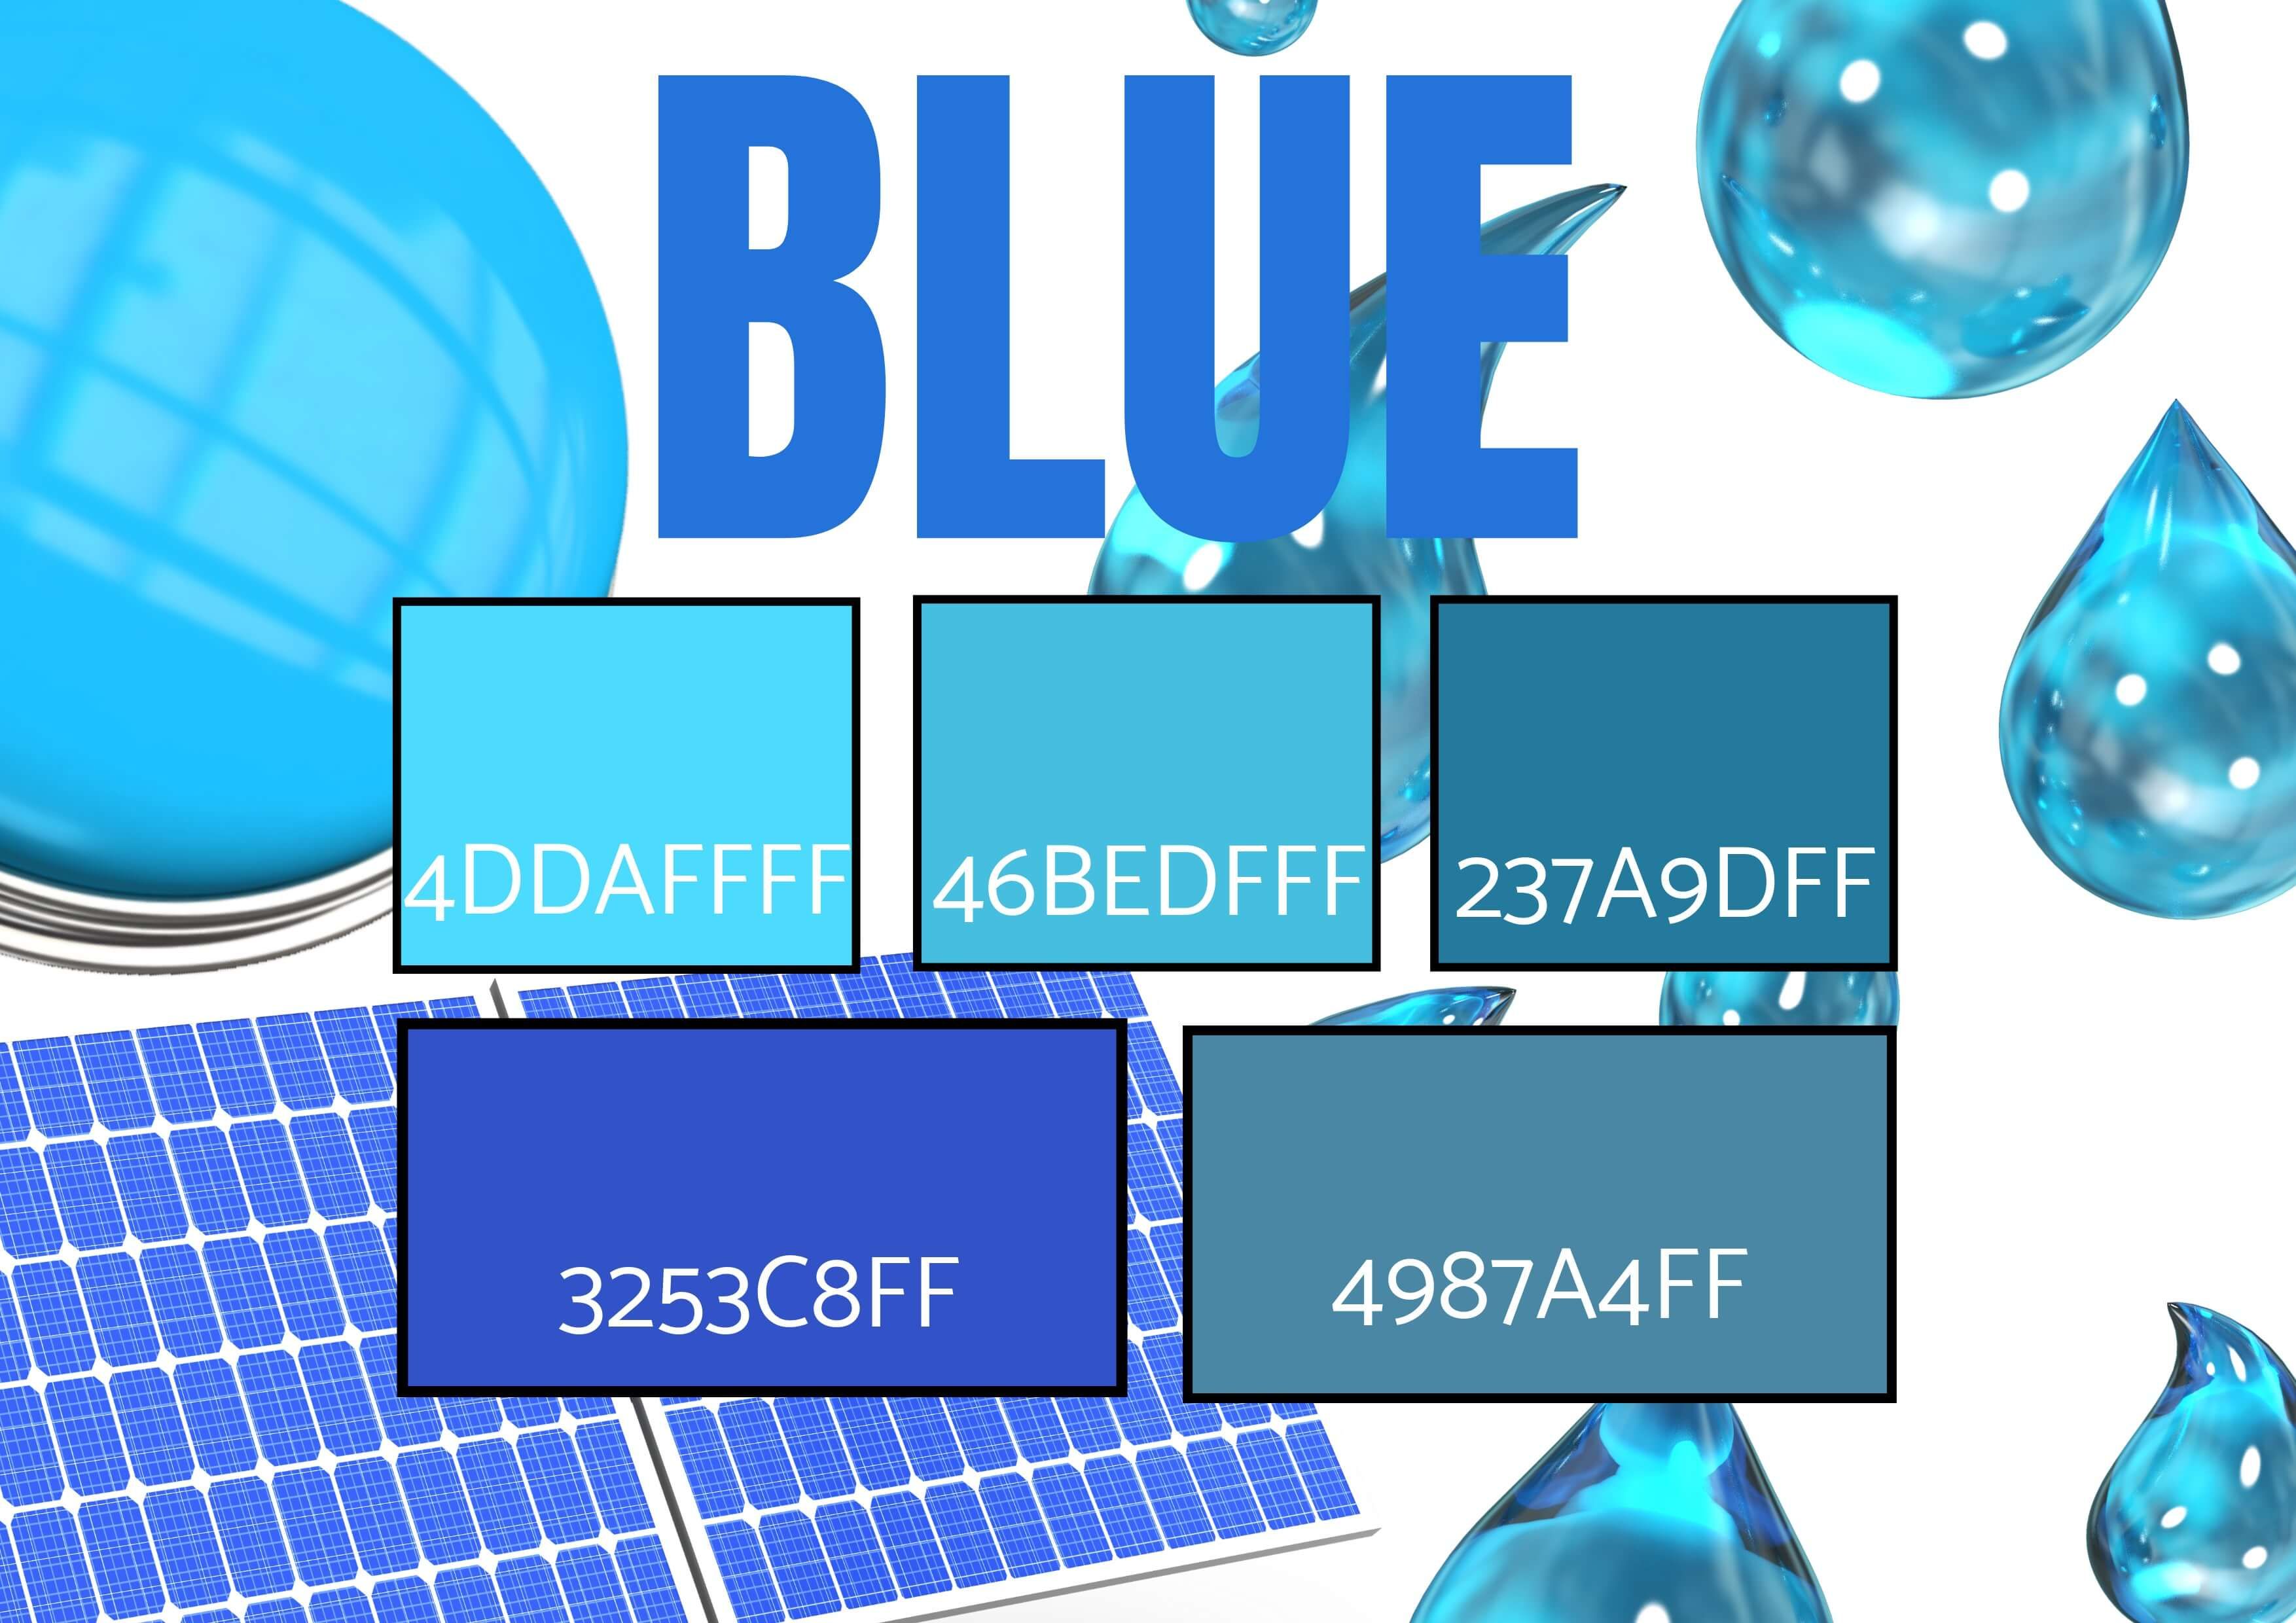 Selection of 5 Blue Shades with images of water drops, button and a solar panel - symbolism - Color theory for designers: The art of using color symbolism - Image